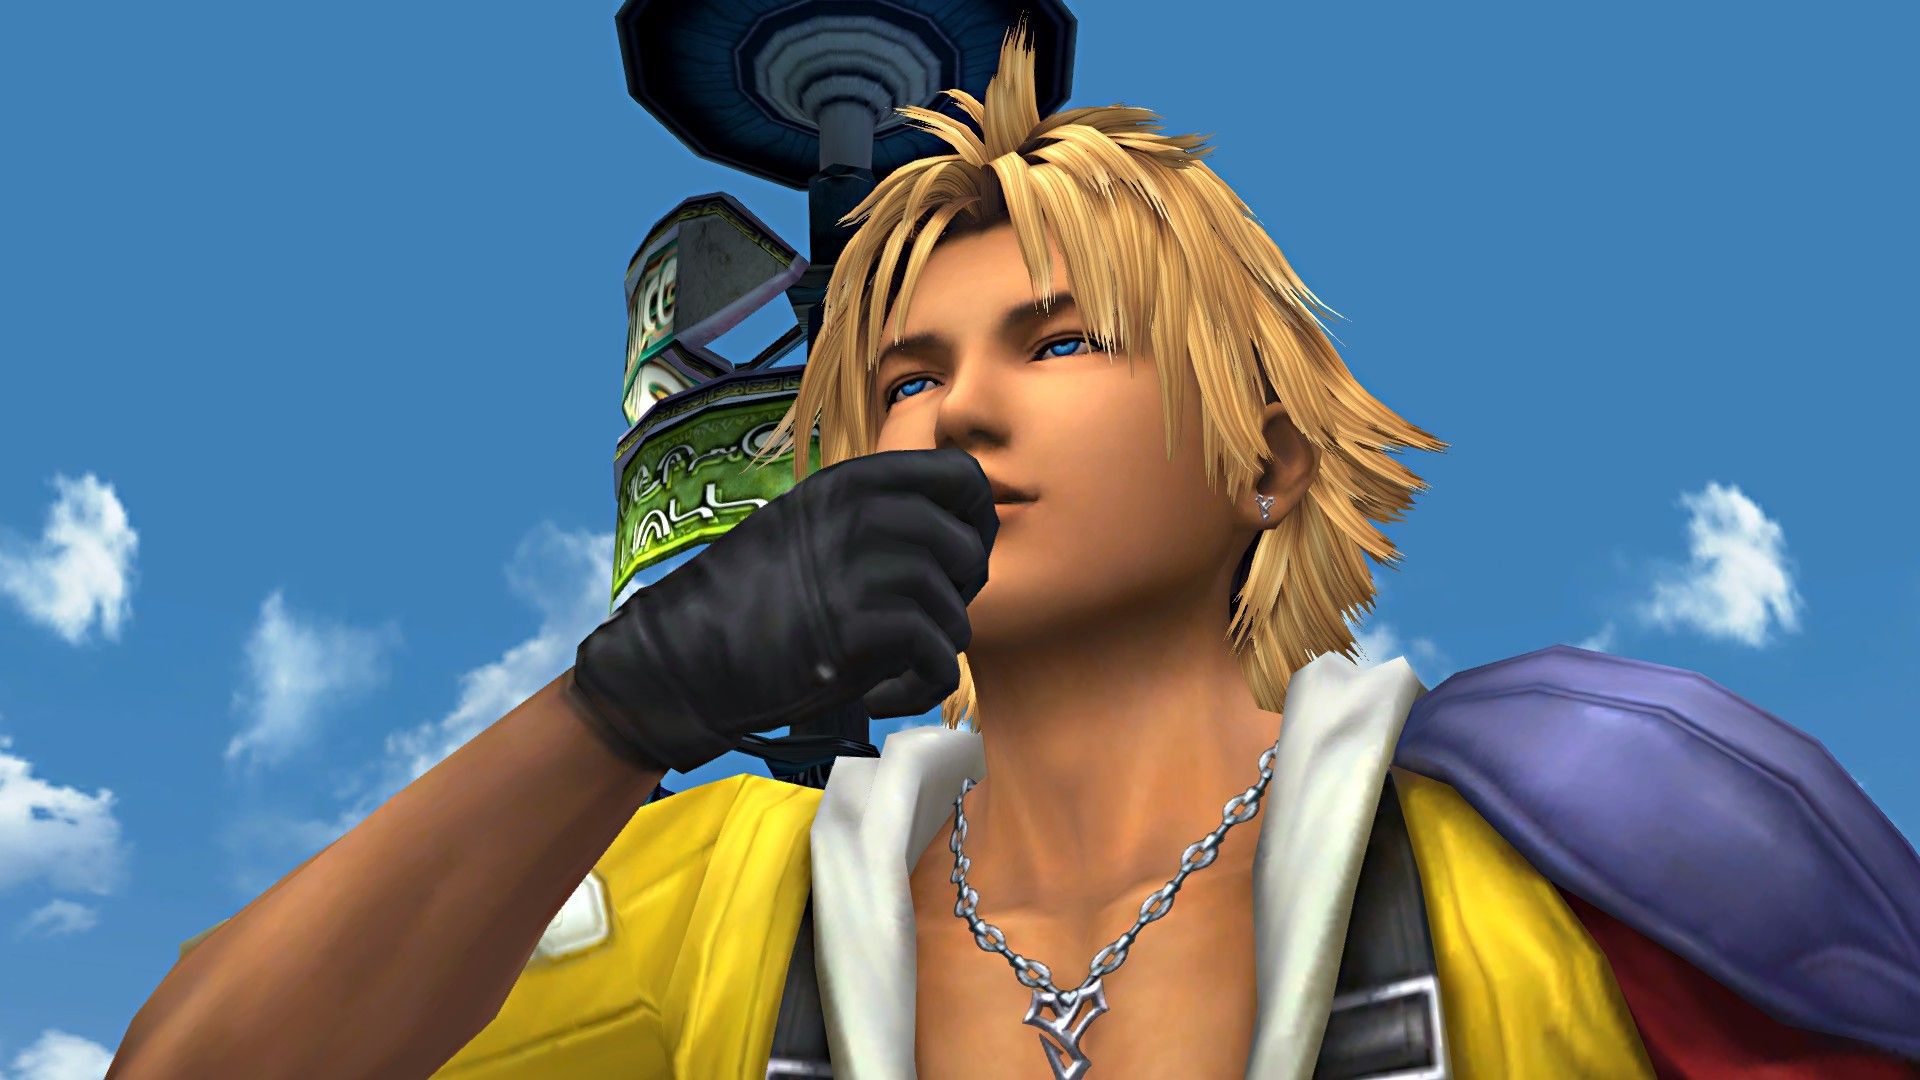 Tidus from Final Fantasy X.